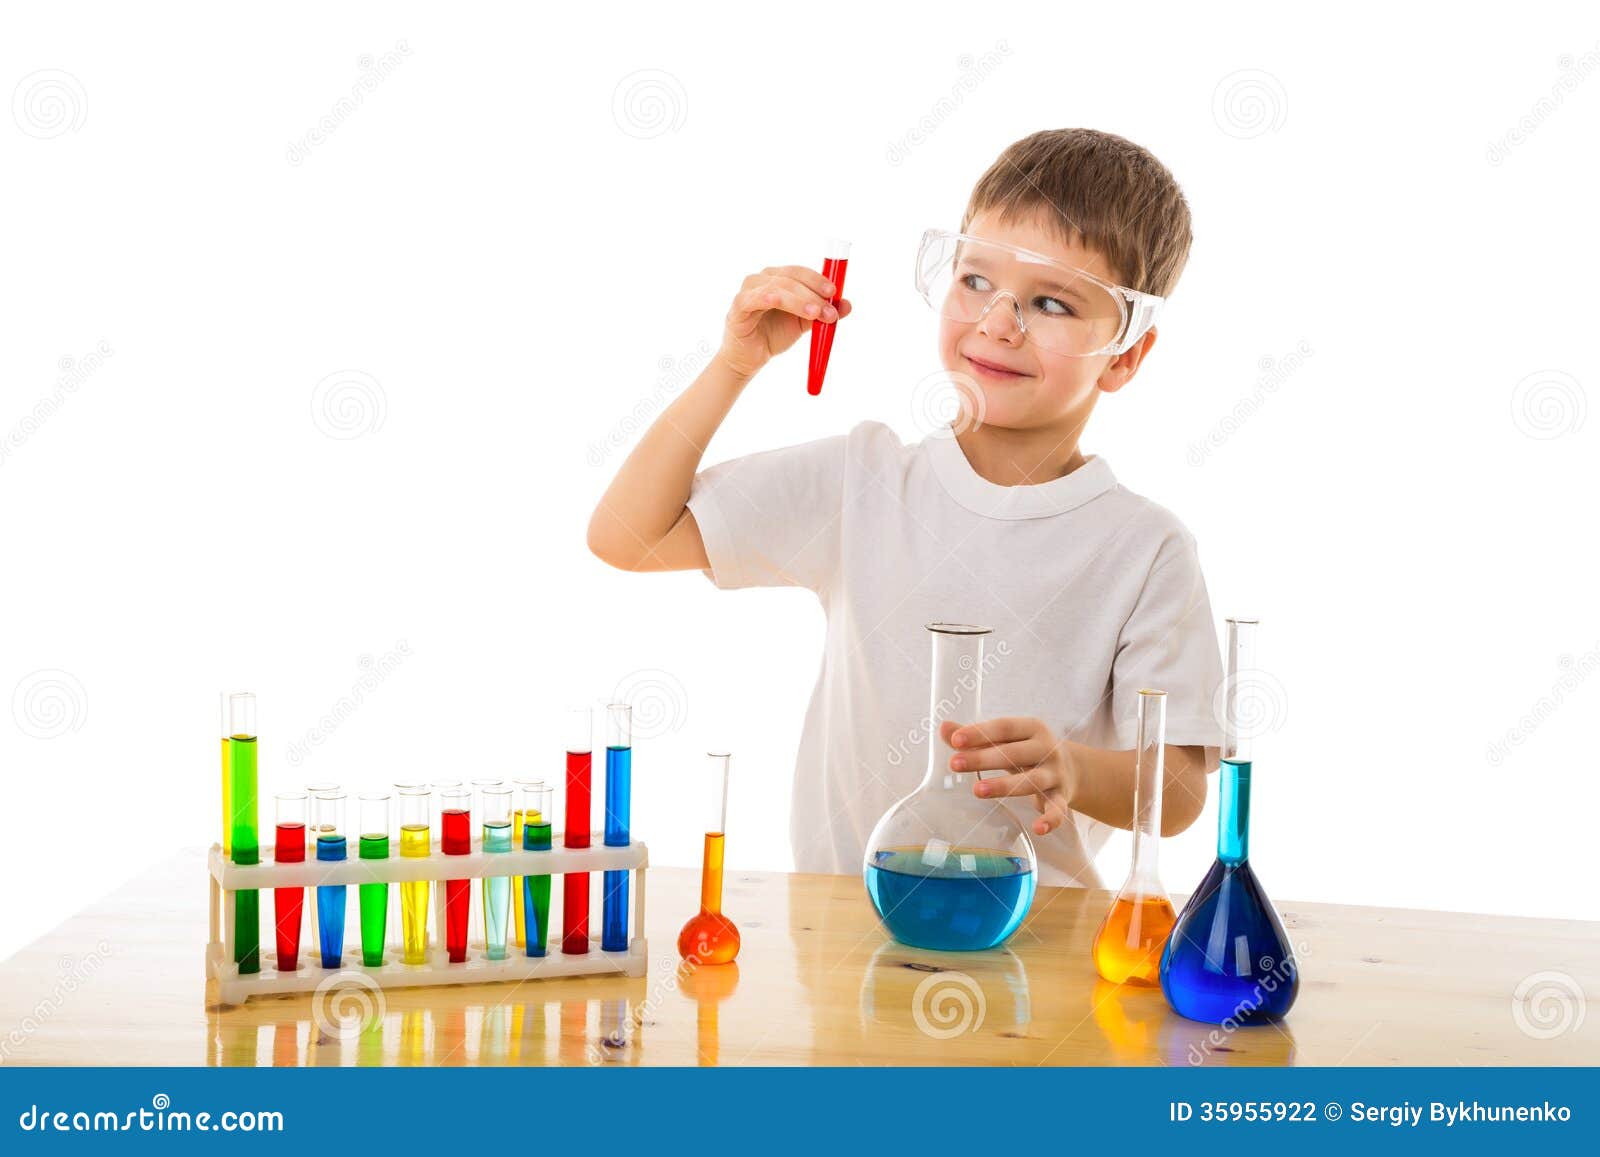 Image result for chemical experiments